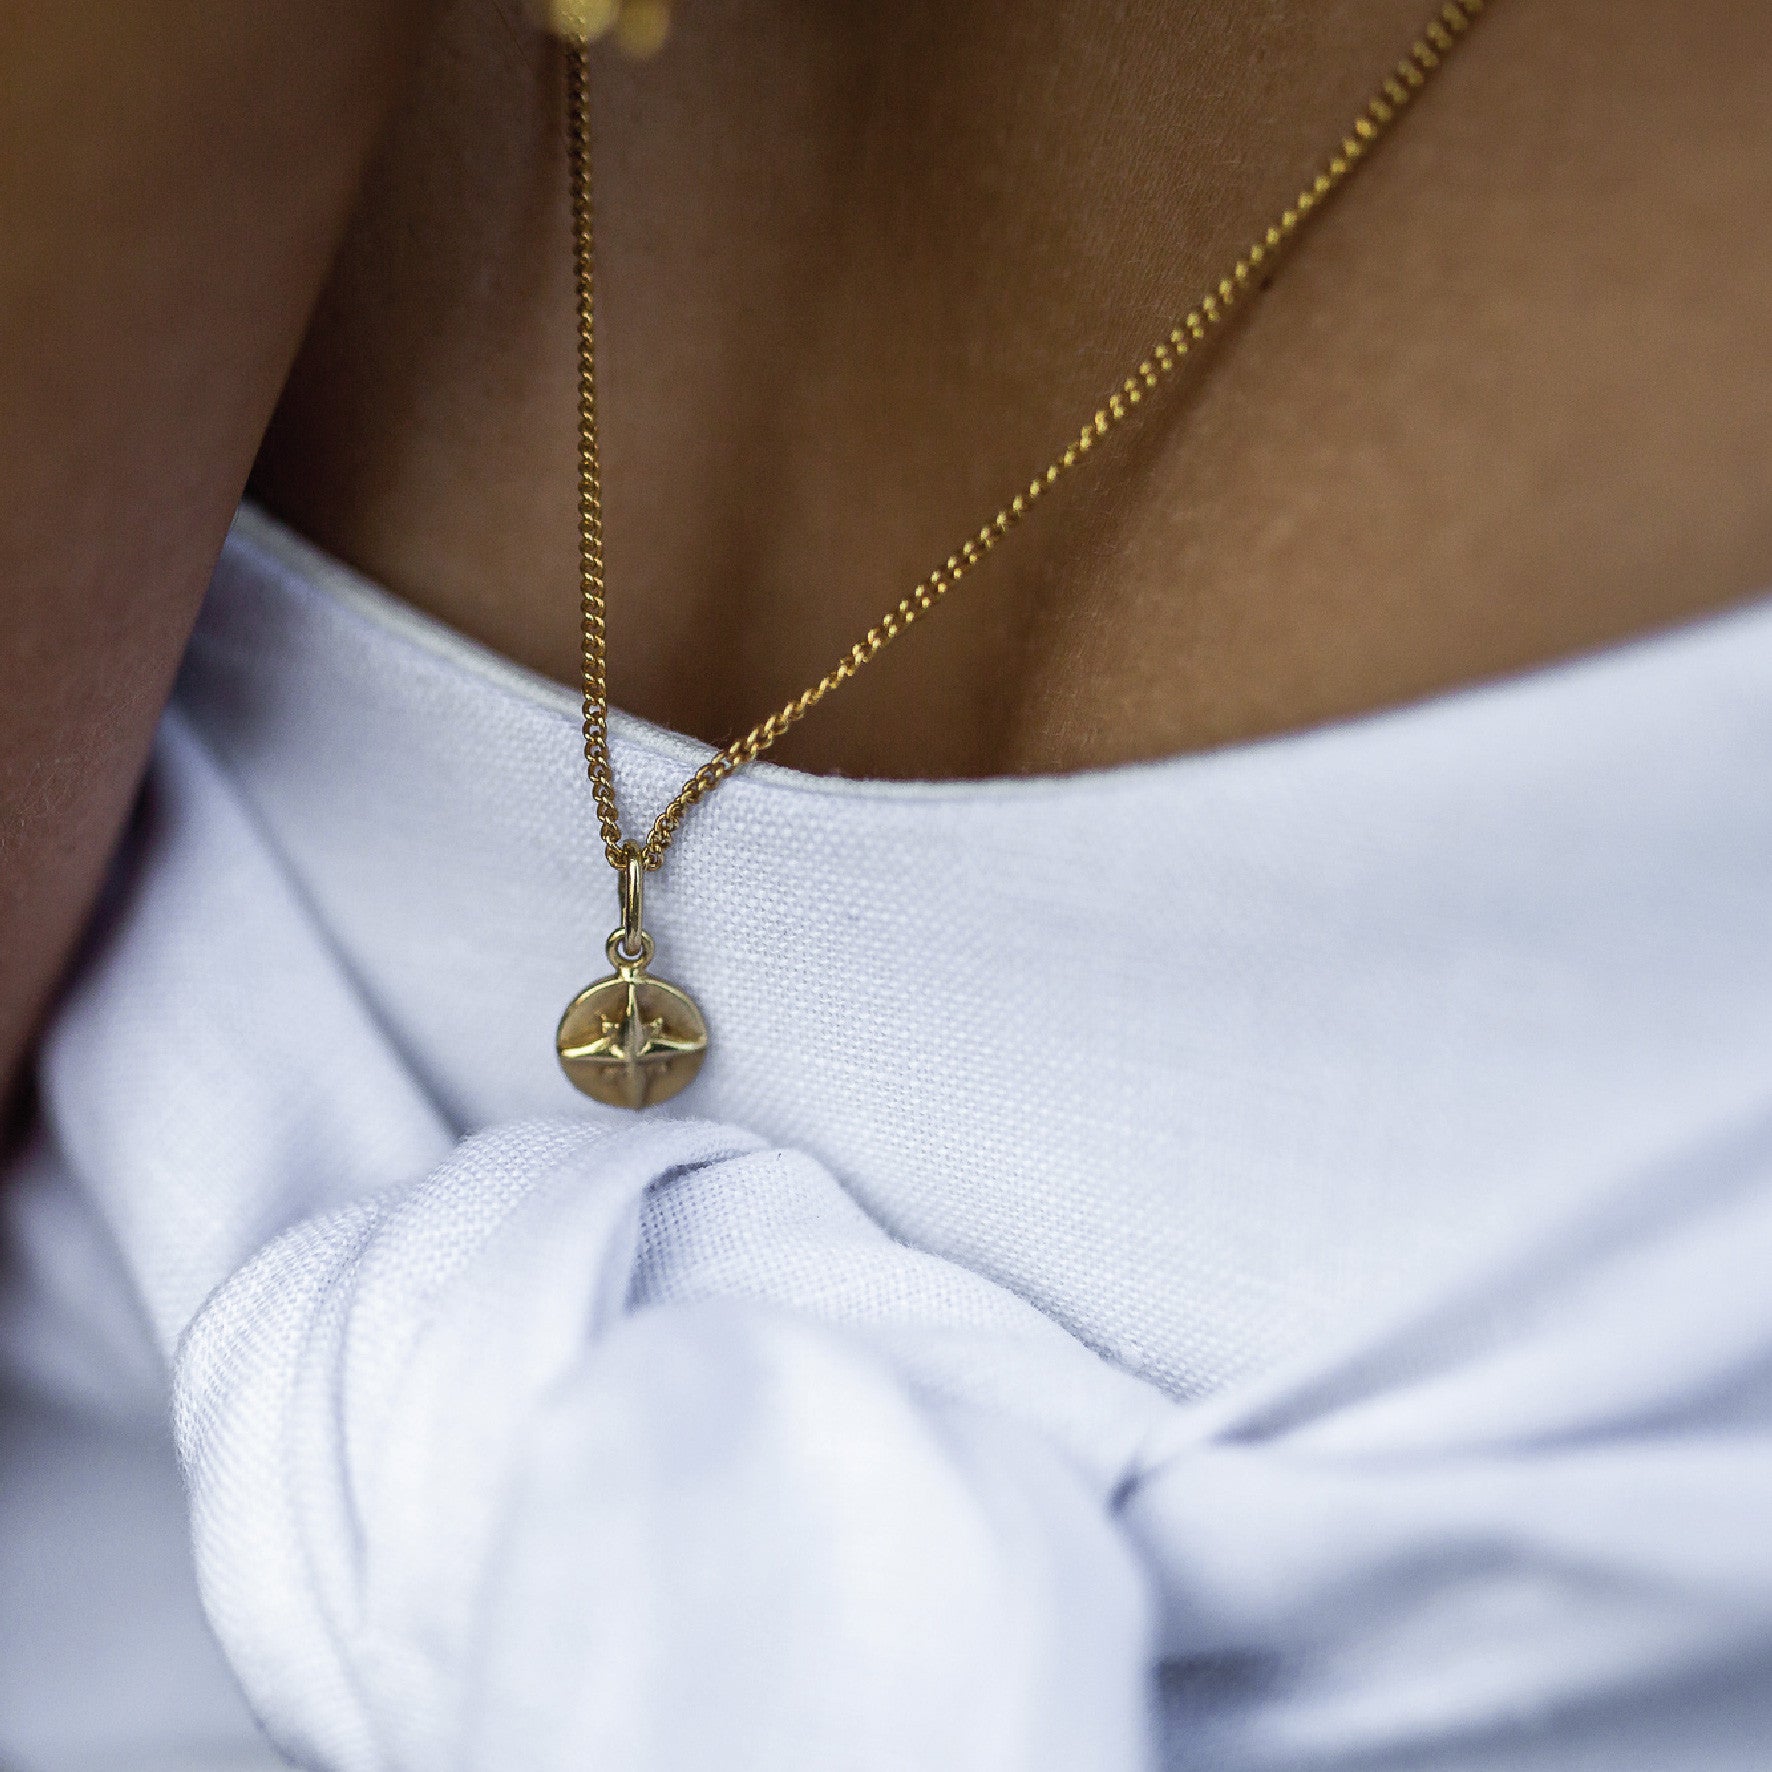 Born to Roam - Compass Necklace Gold